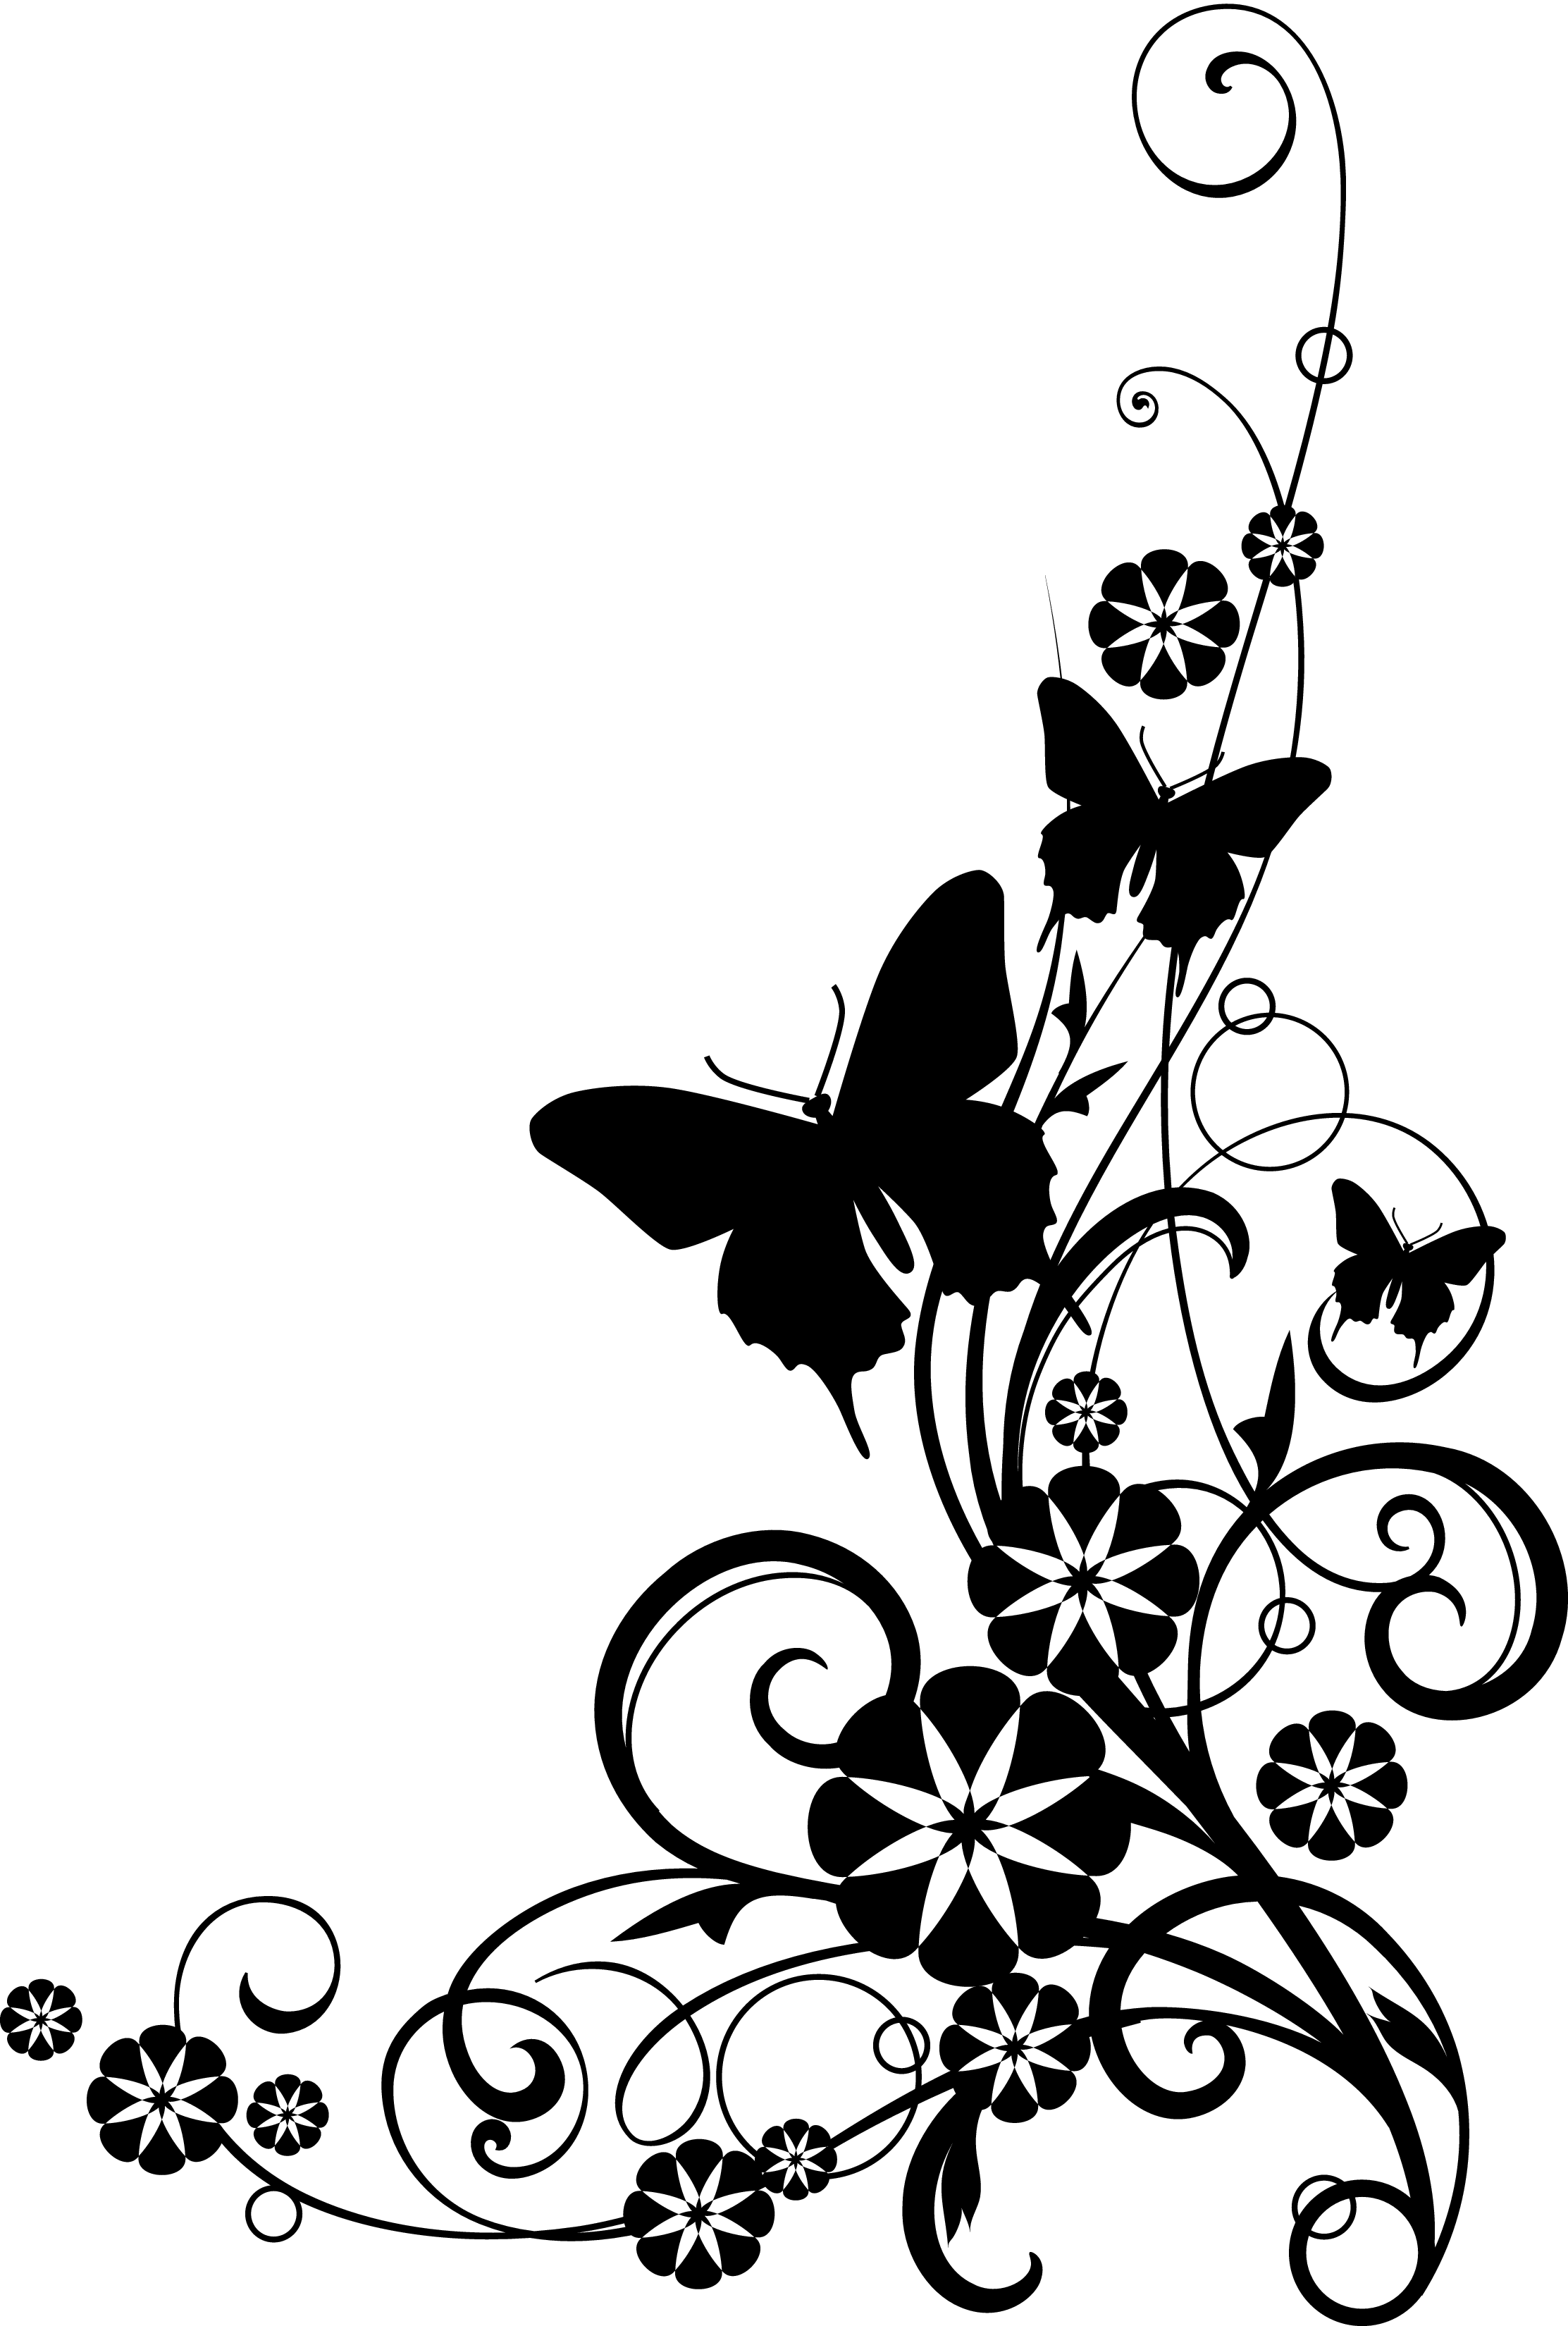 Flower With Stem Clip Art Black And White Widescreen 2 HD ...